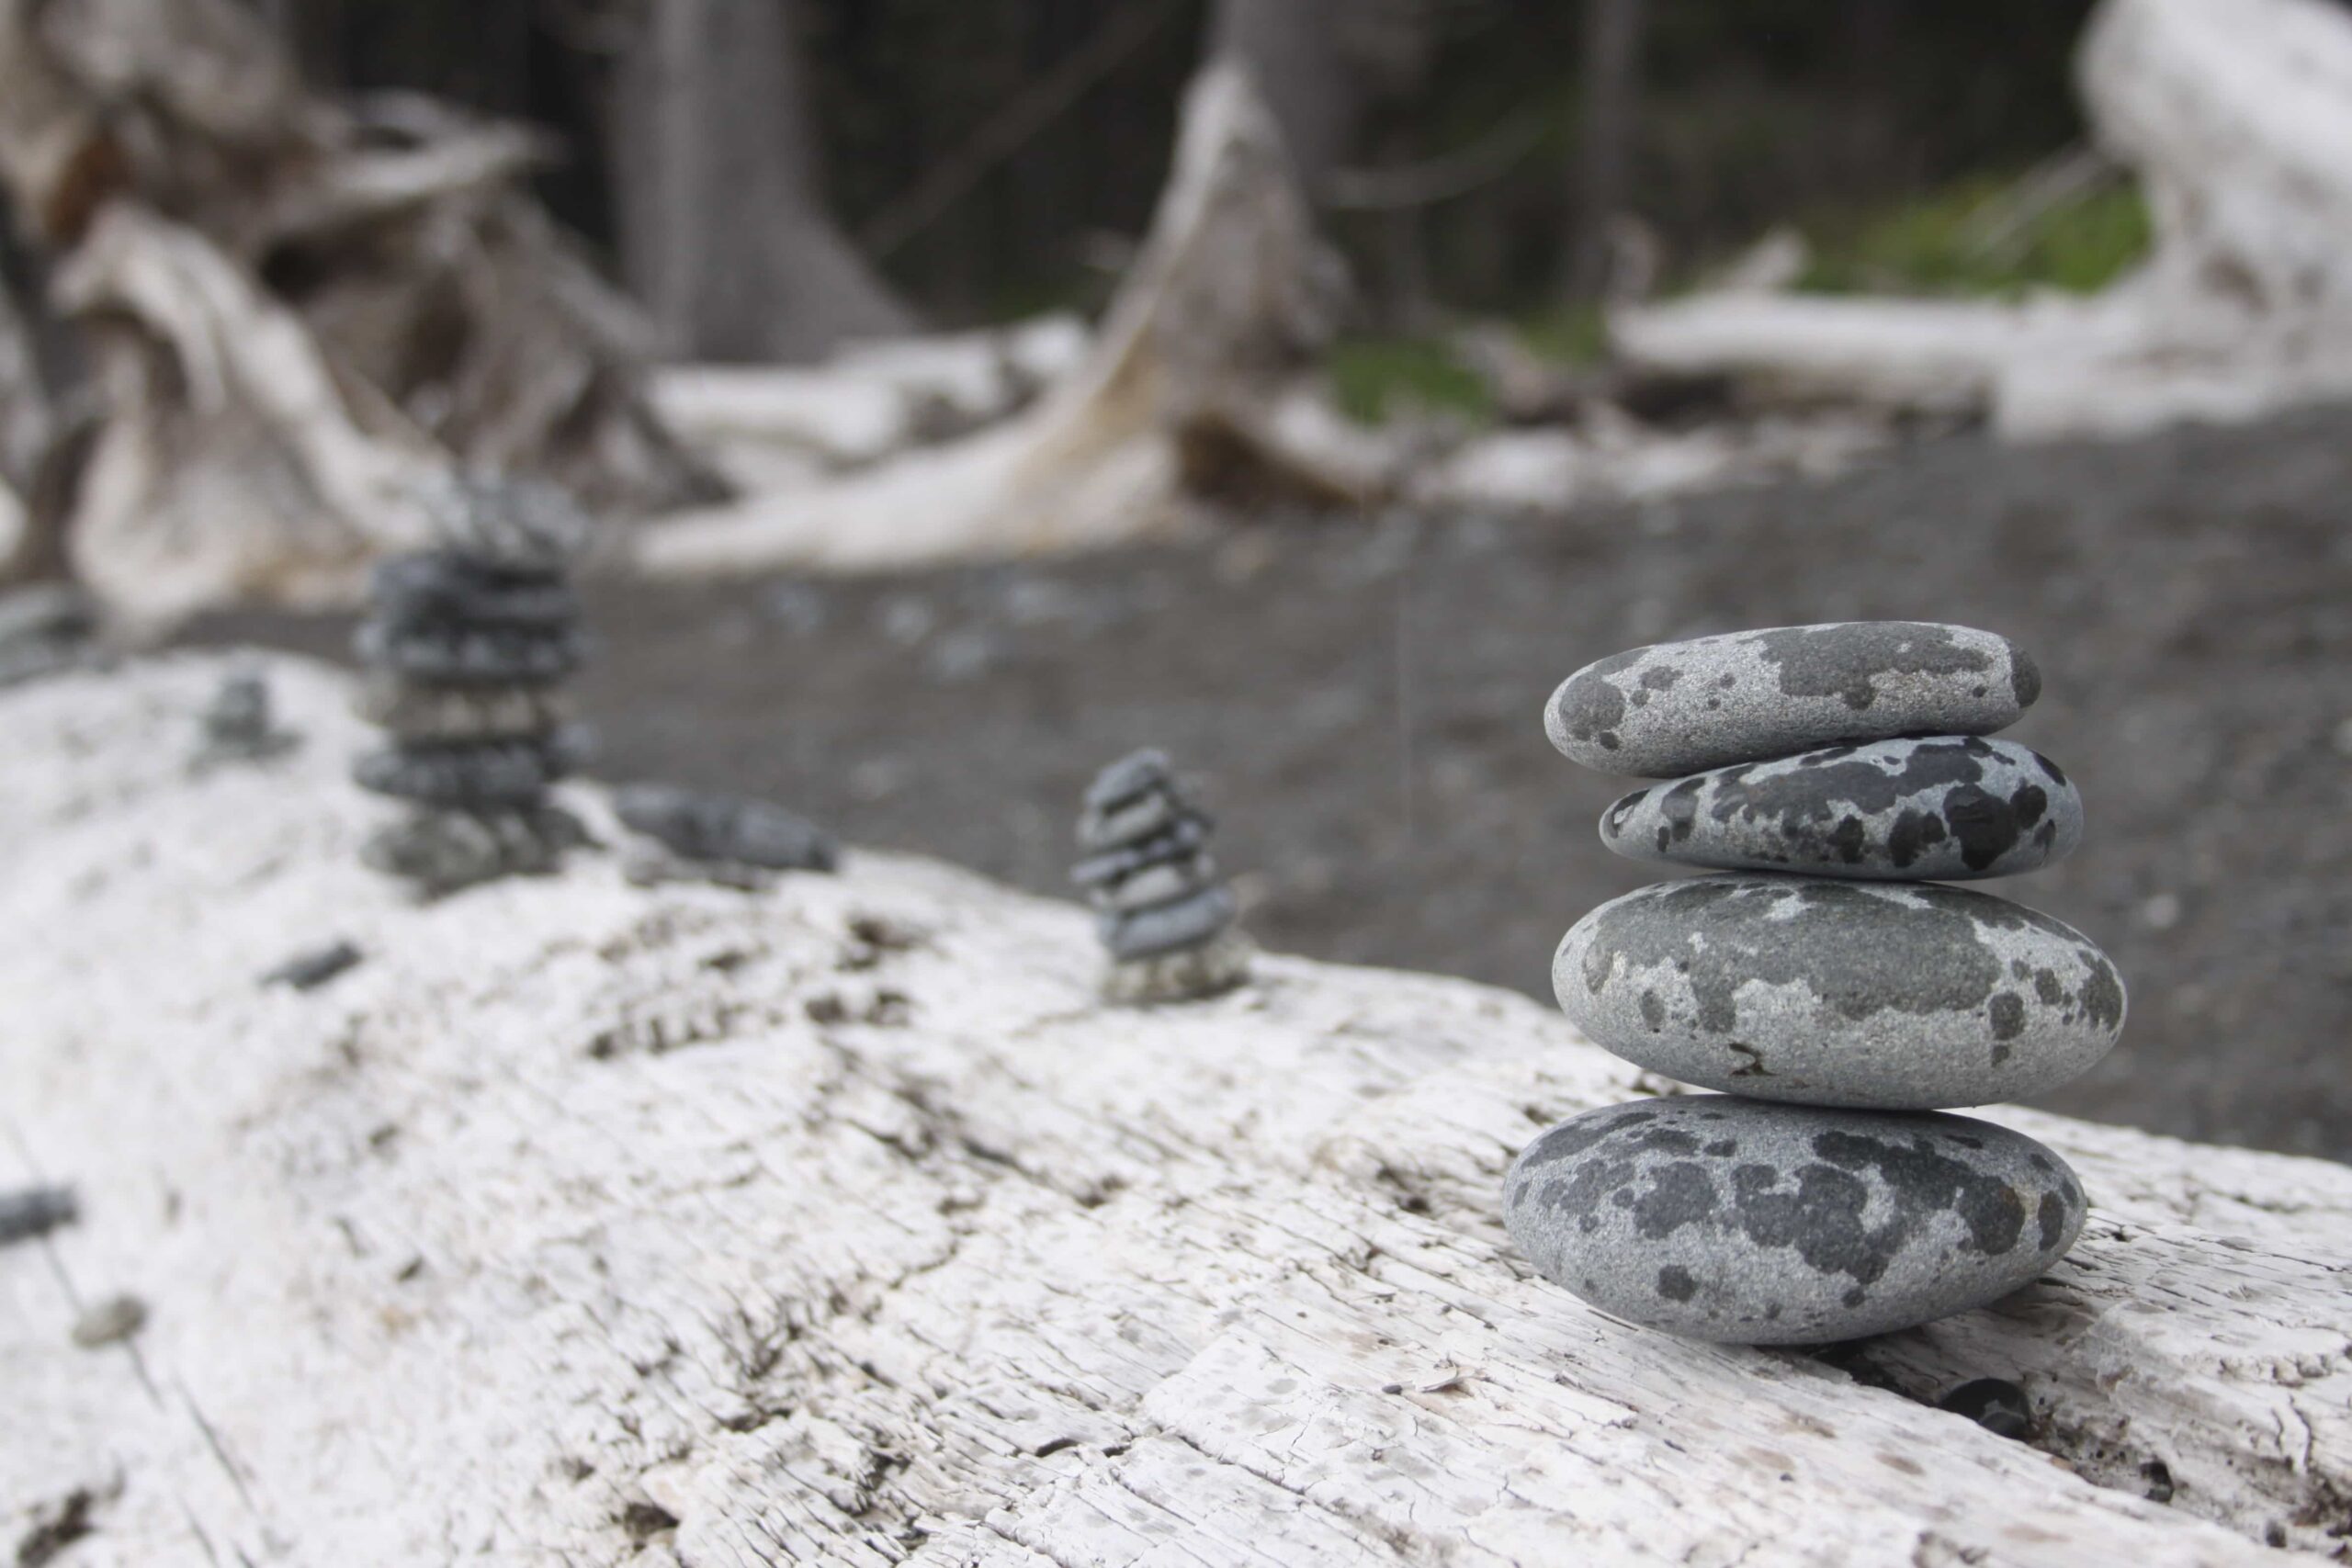 Rocks stacked in a cairn on a log with rain drops on them.